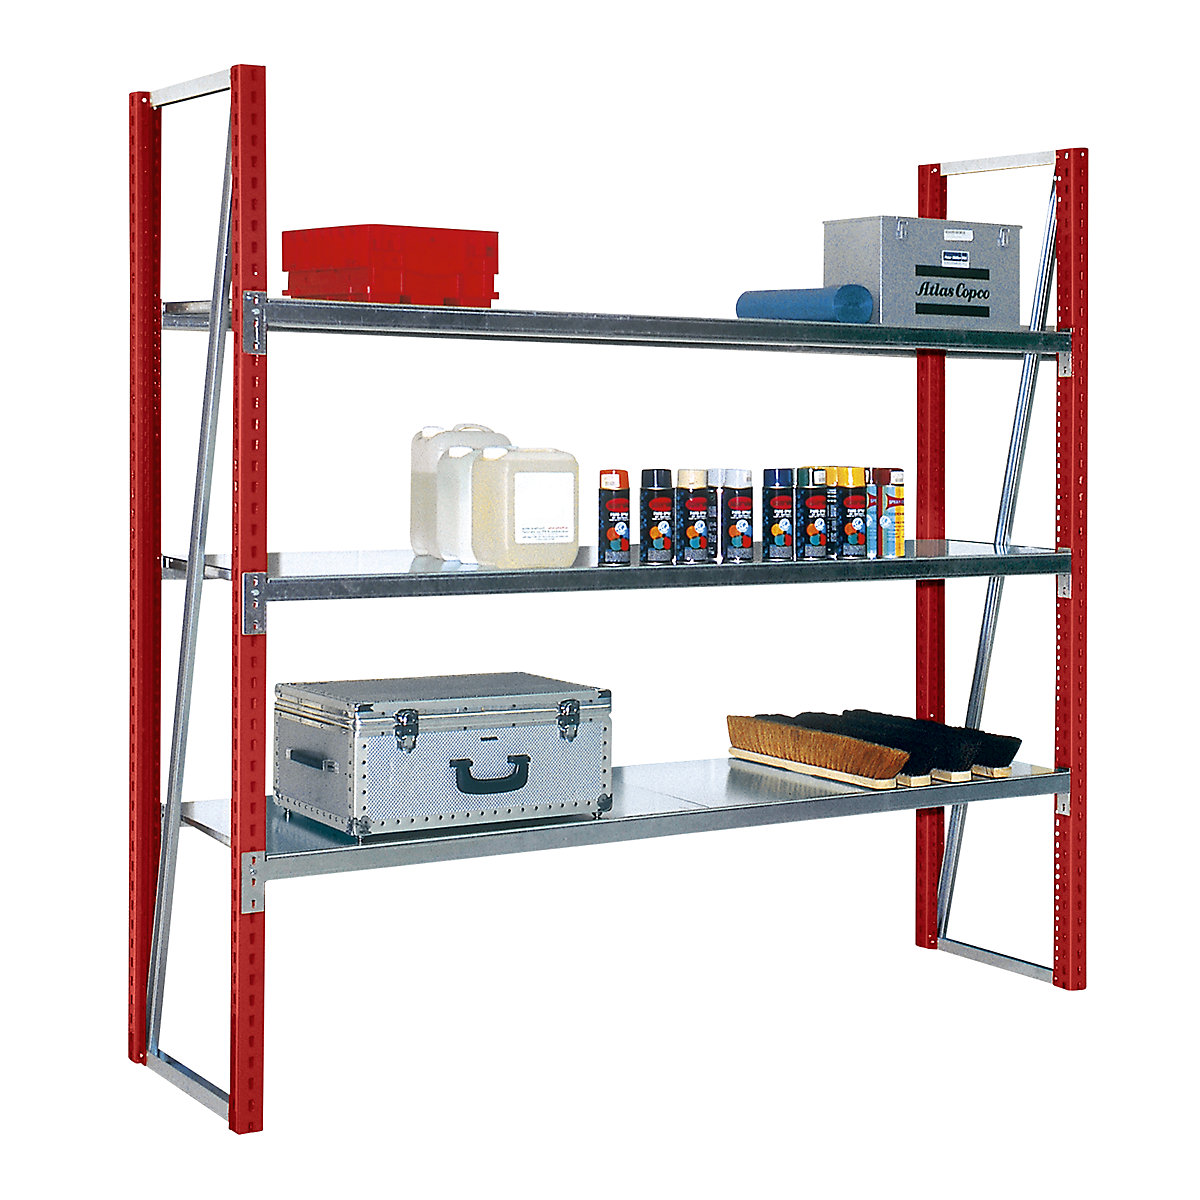 Wide span shelving, coloured – eurokraft pro, HxD 1990 x 600 mm, extension shelf unit, flame red RAL 3000